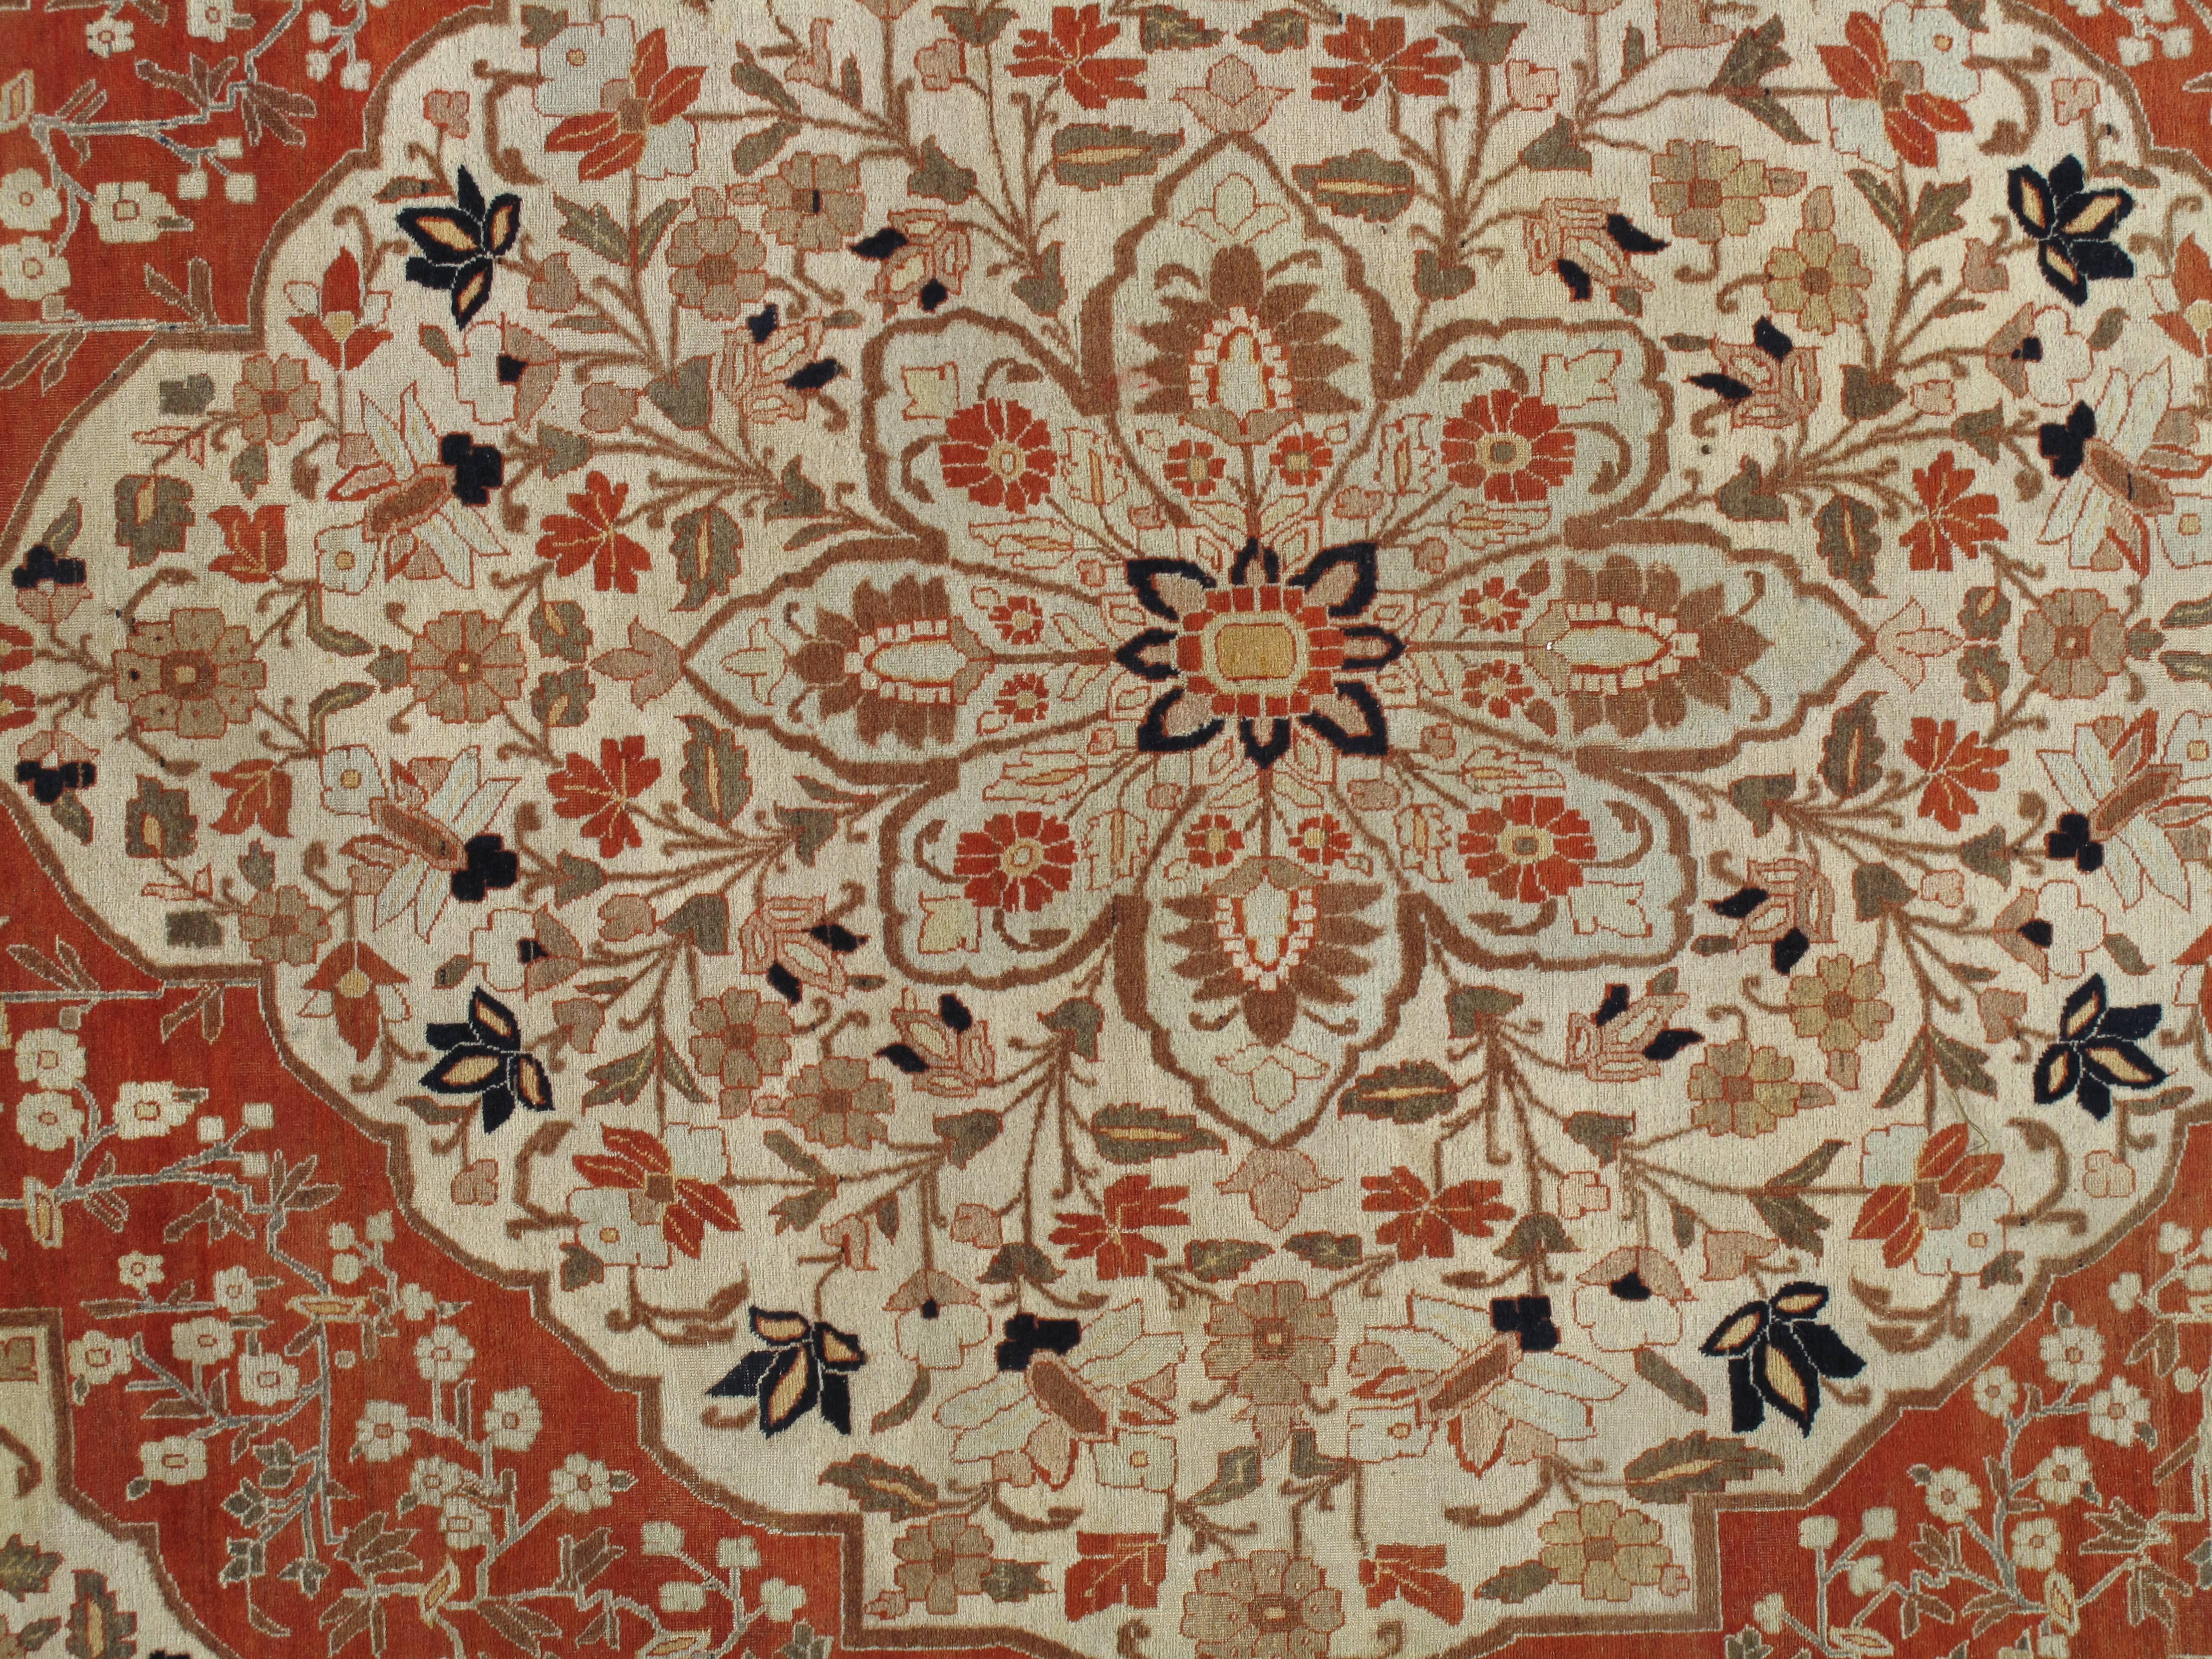 Hand-Knotted Antique Tabriz Carpet, Handmade Persian Rug in Floral Soft, Beige and Taupe